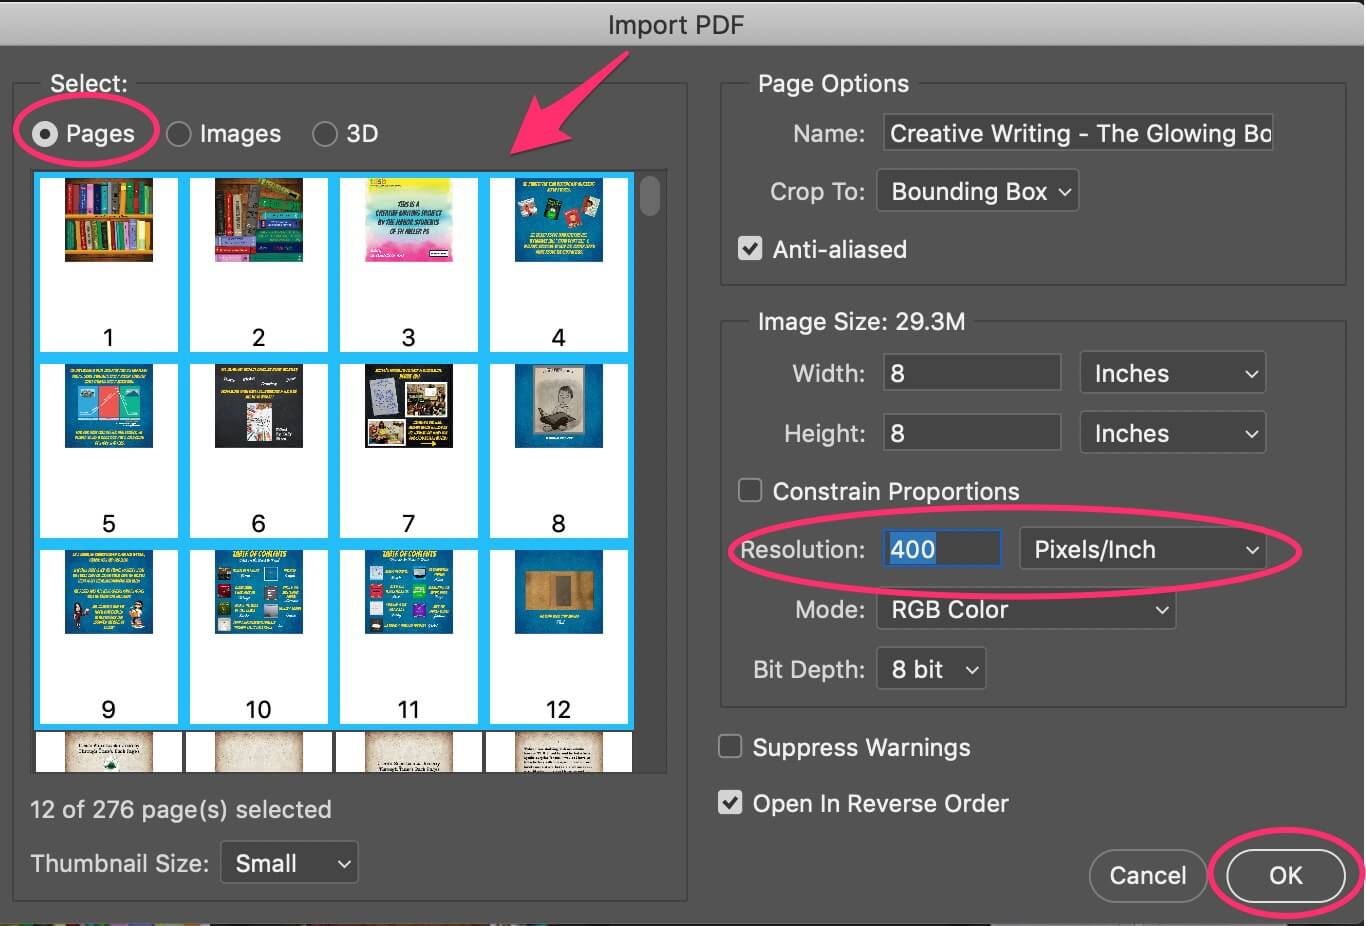 Importing the PDF into Photoshop